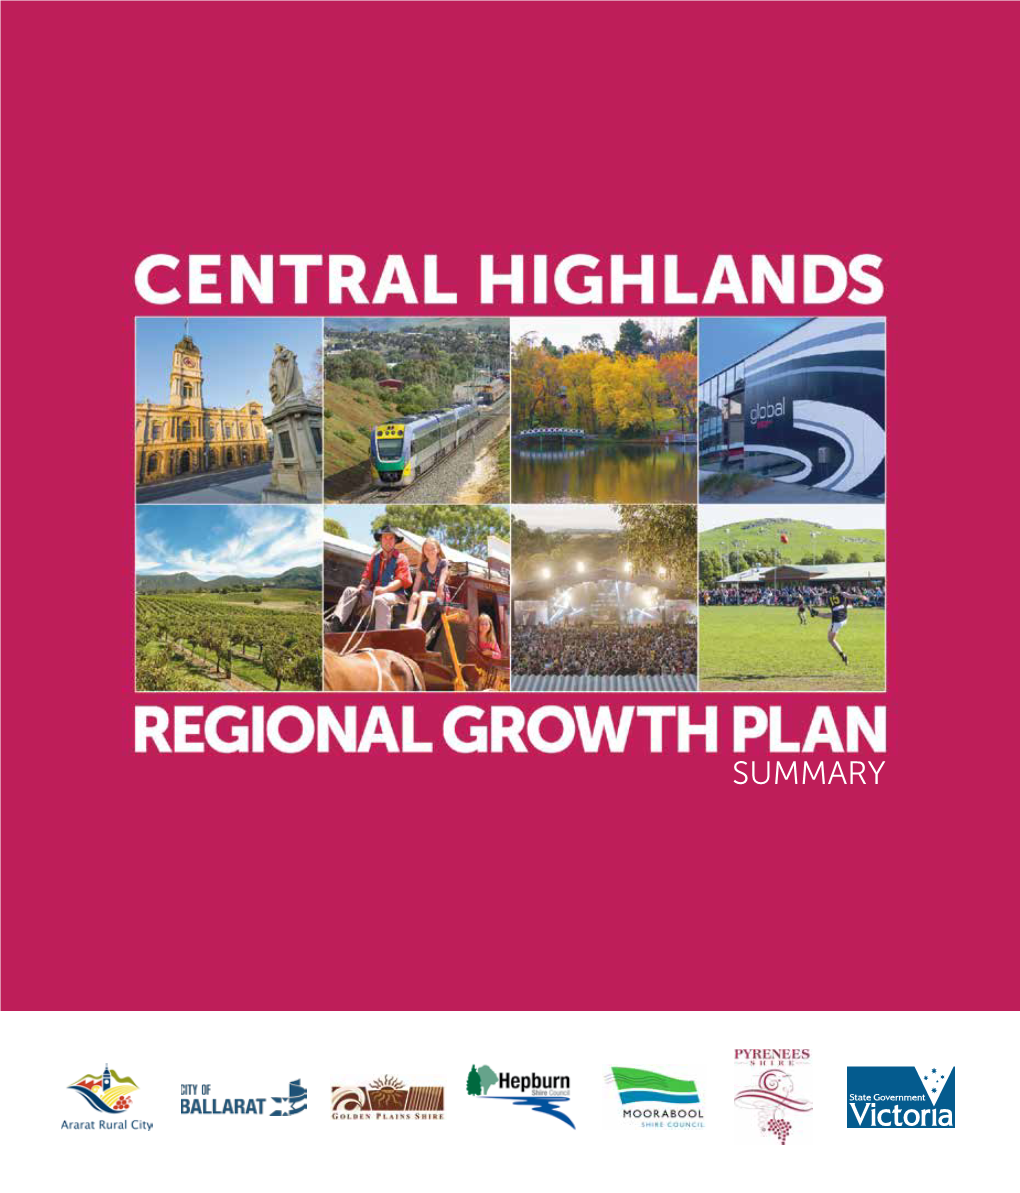 SUMMARY This Document Is a Summary of the Central Highlands Regional Growth Plan